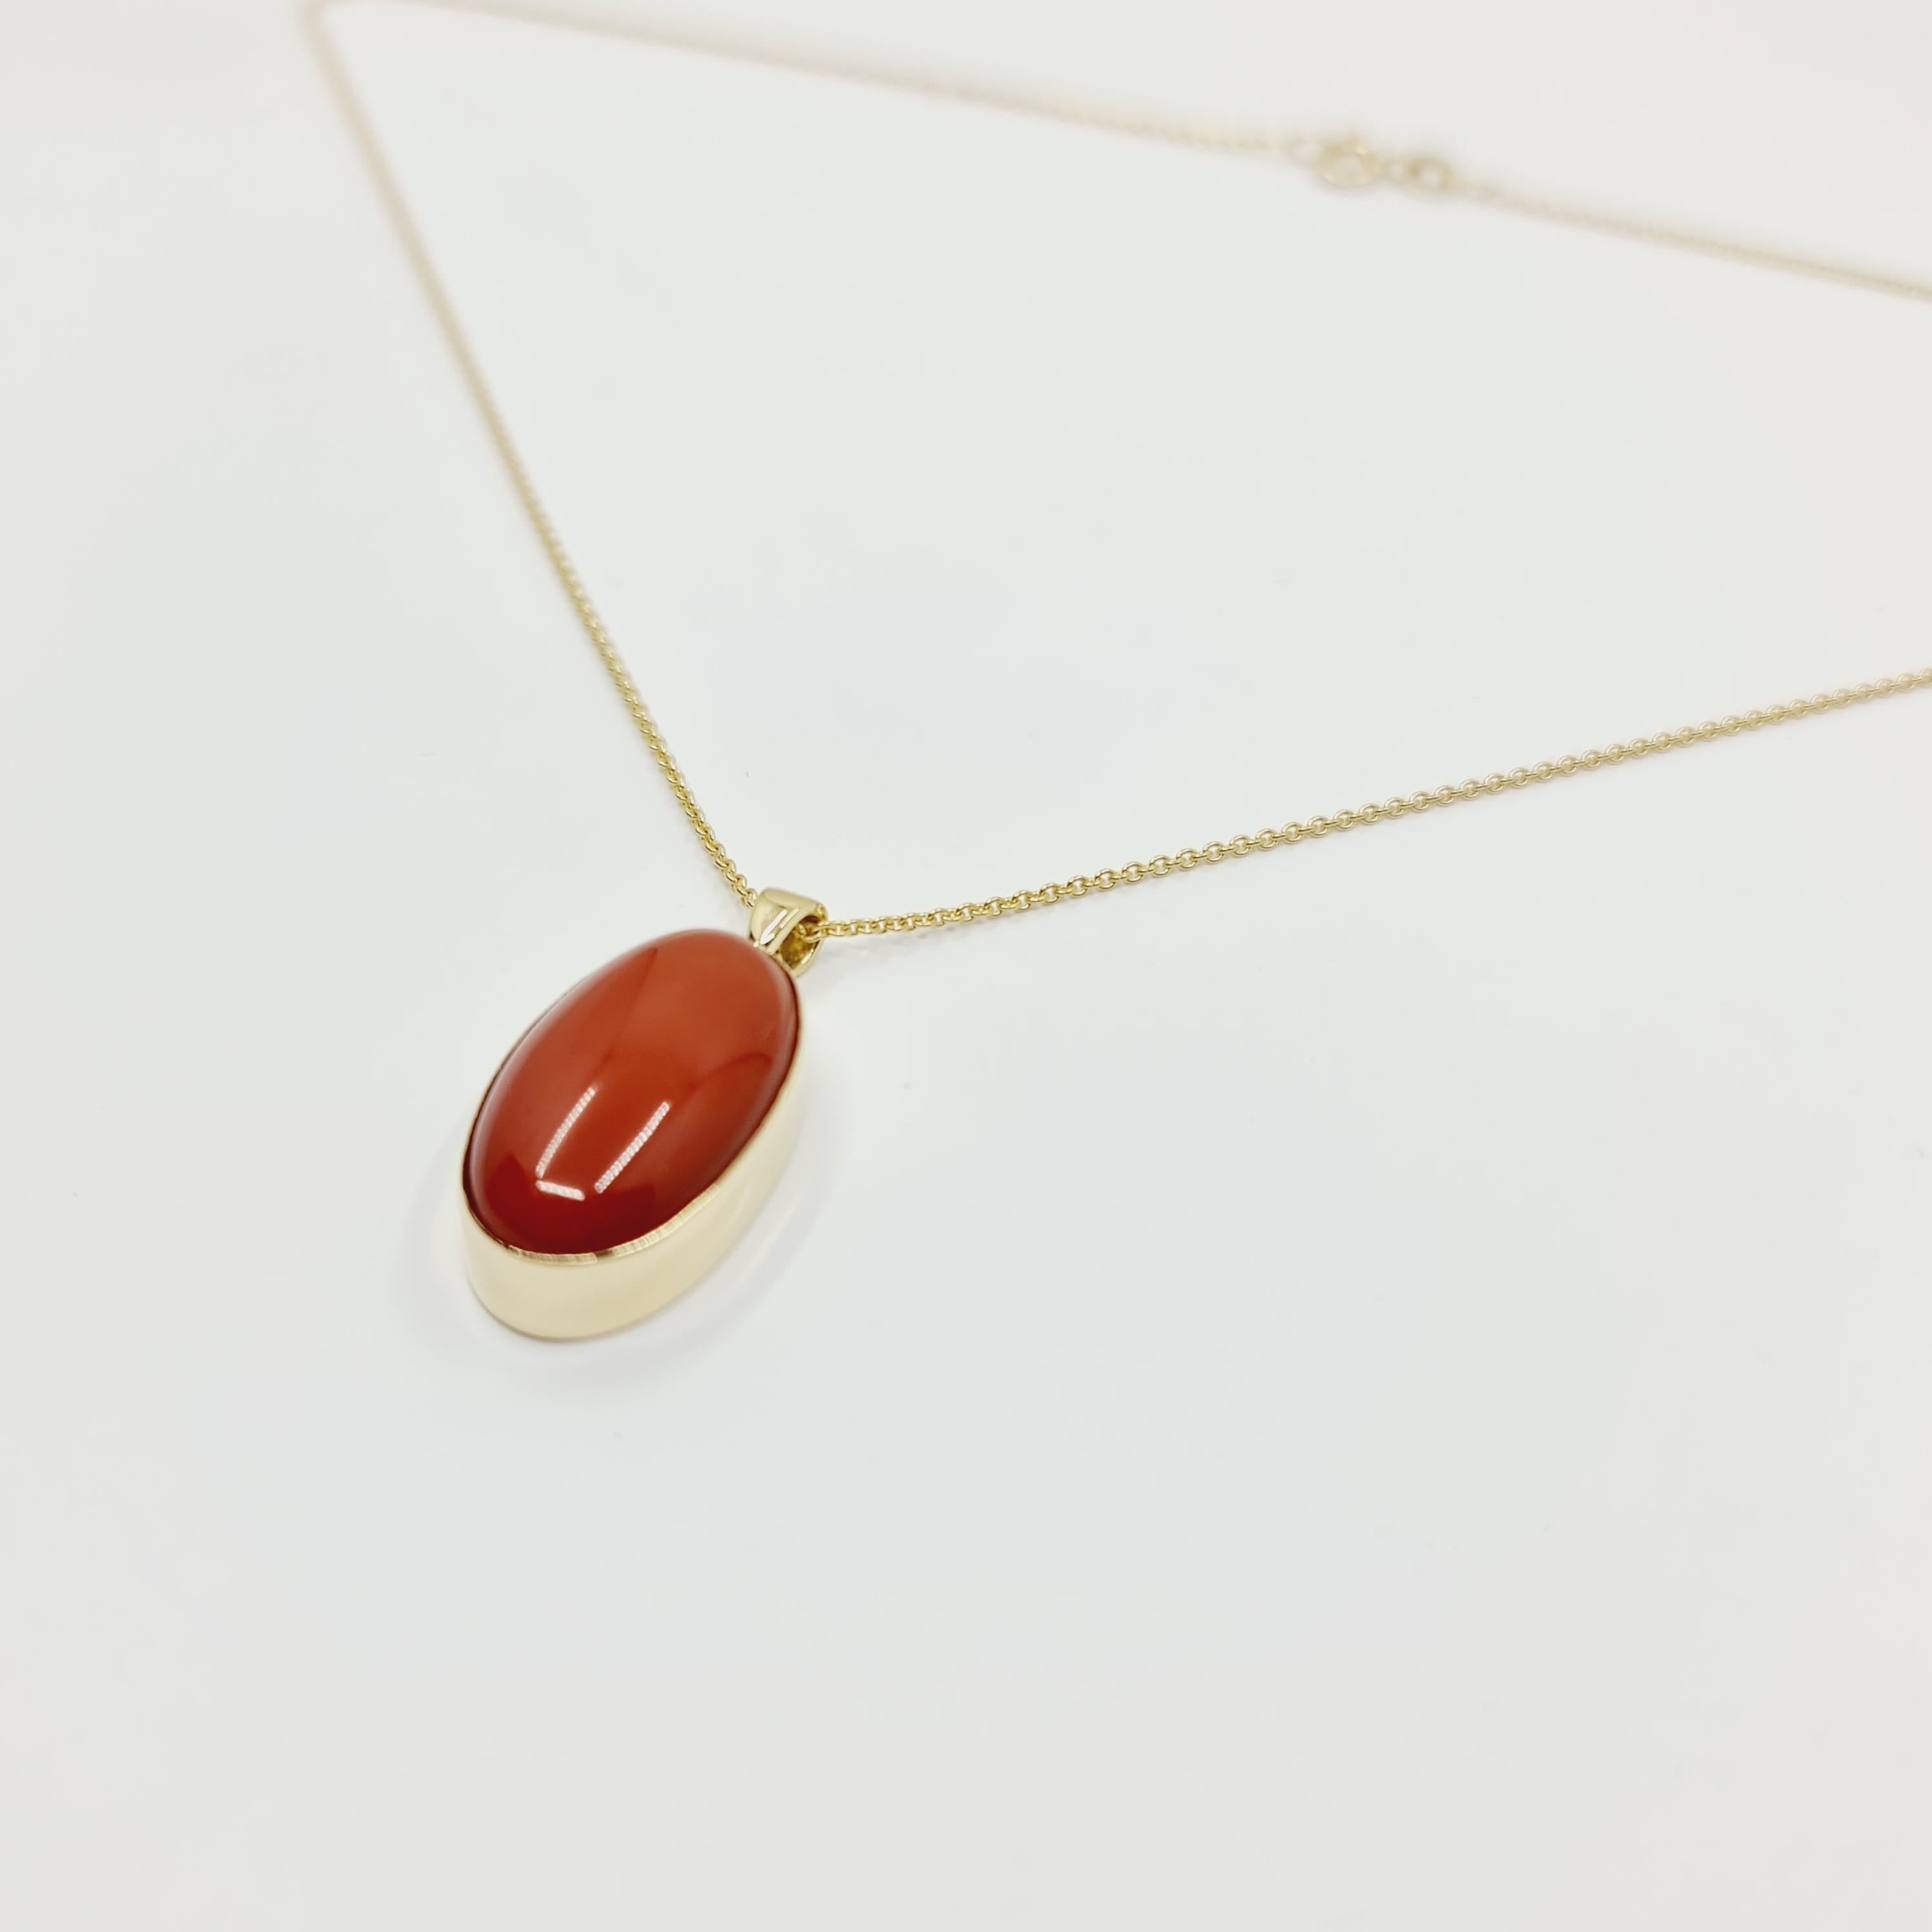 Women's 14k Gold Necklace with Oval Cut Natural Coral 13.3 Ct. For Sale